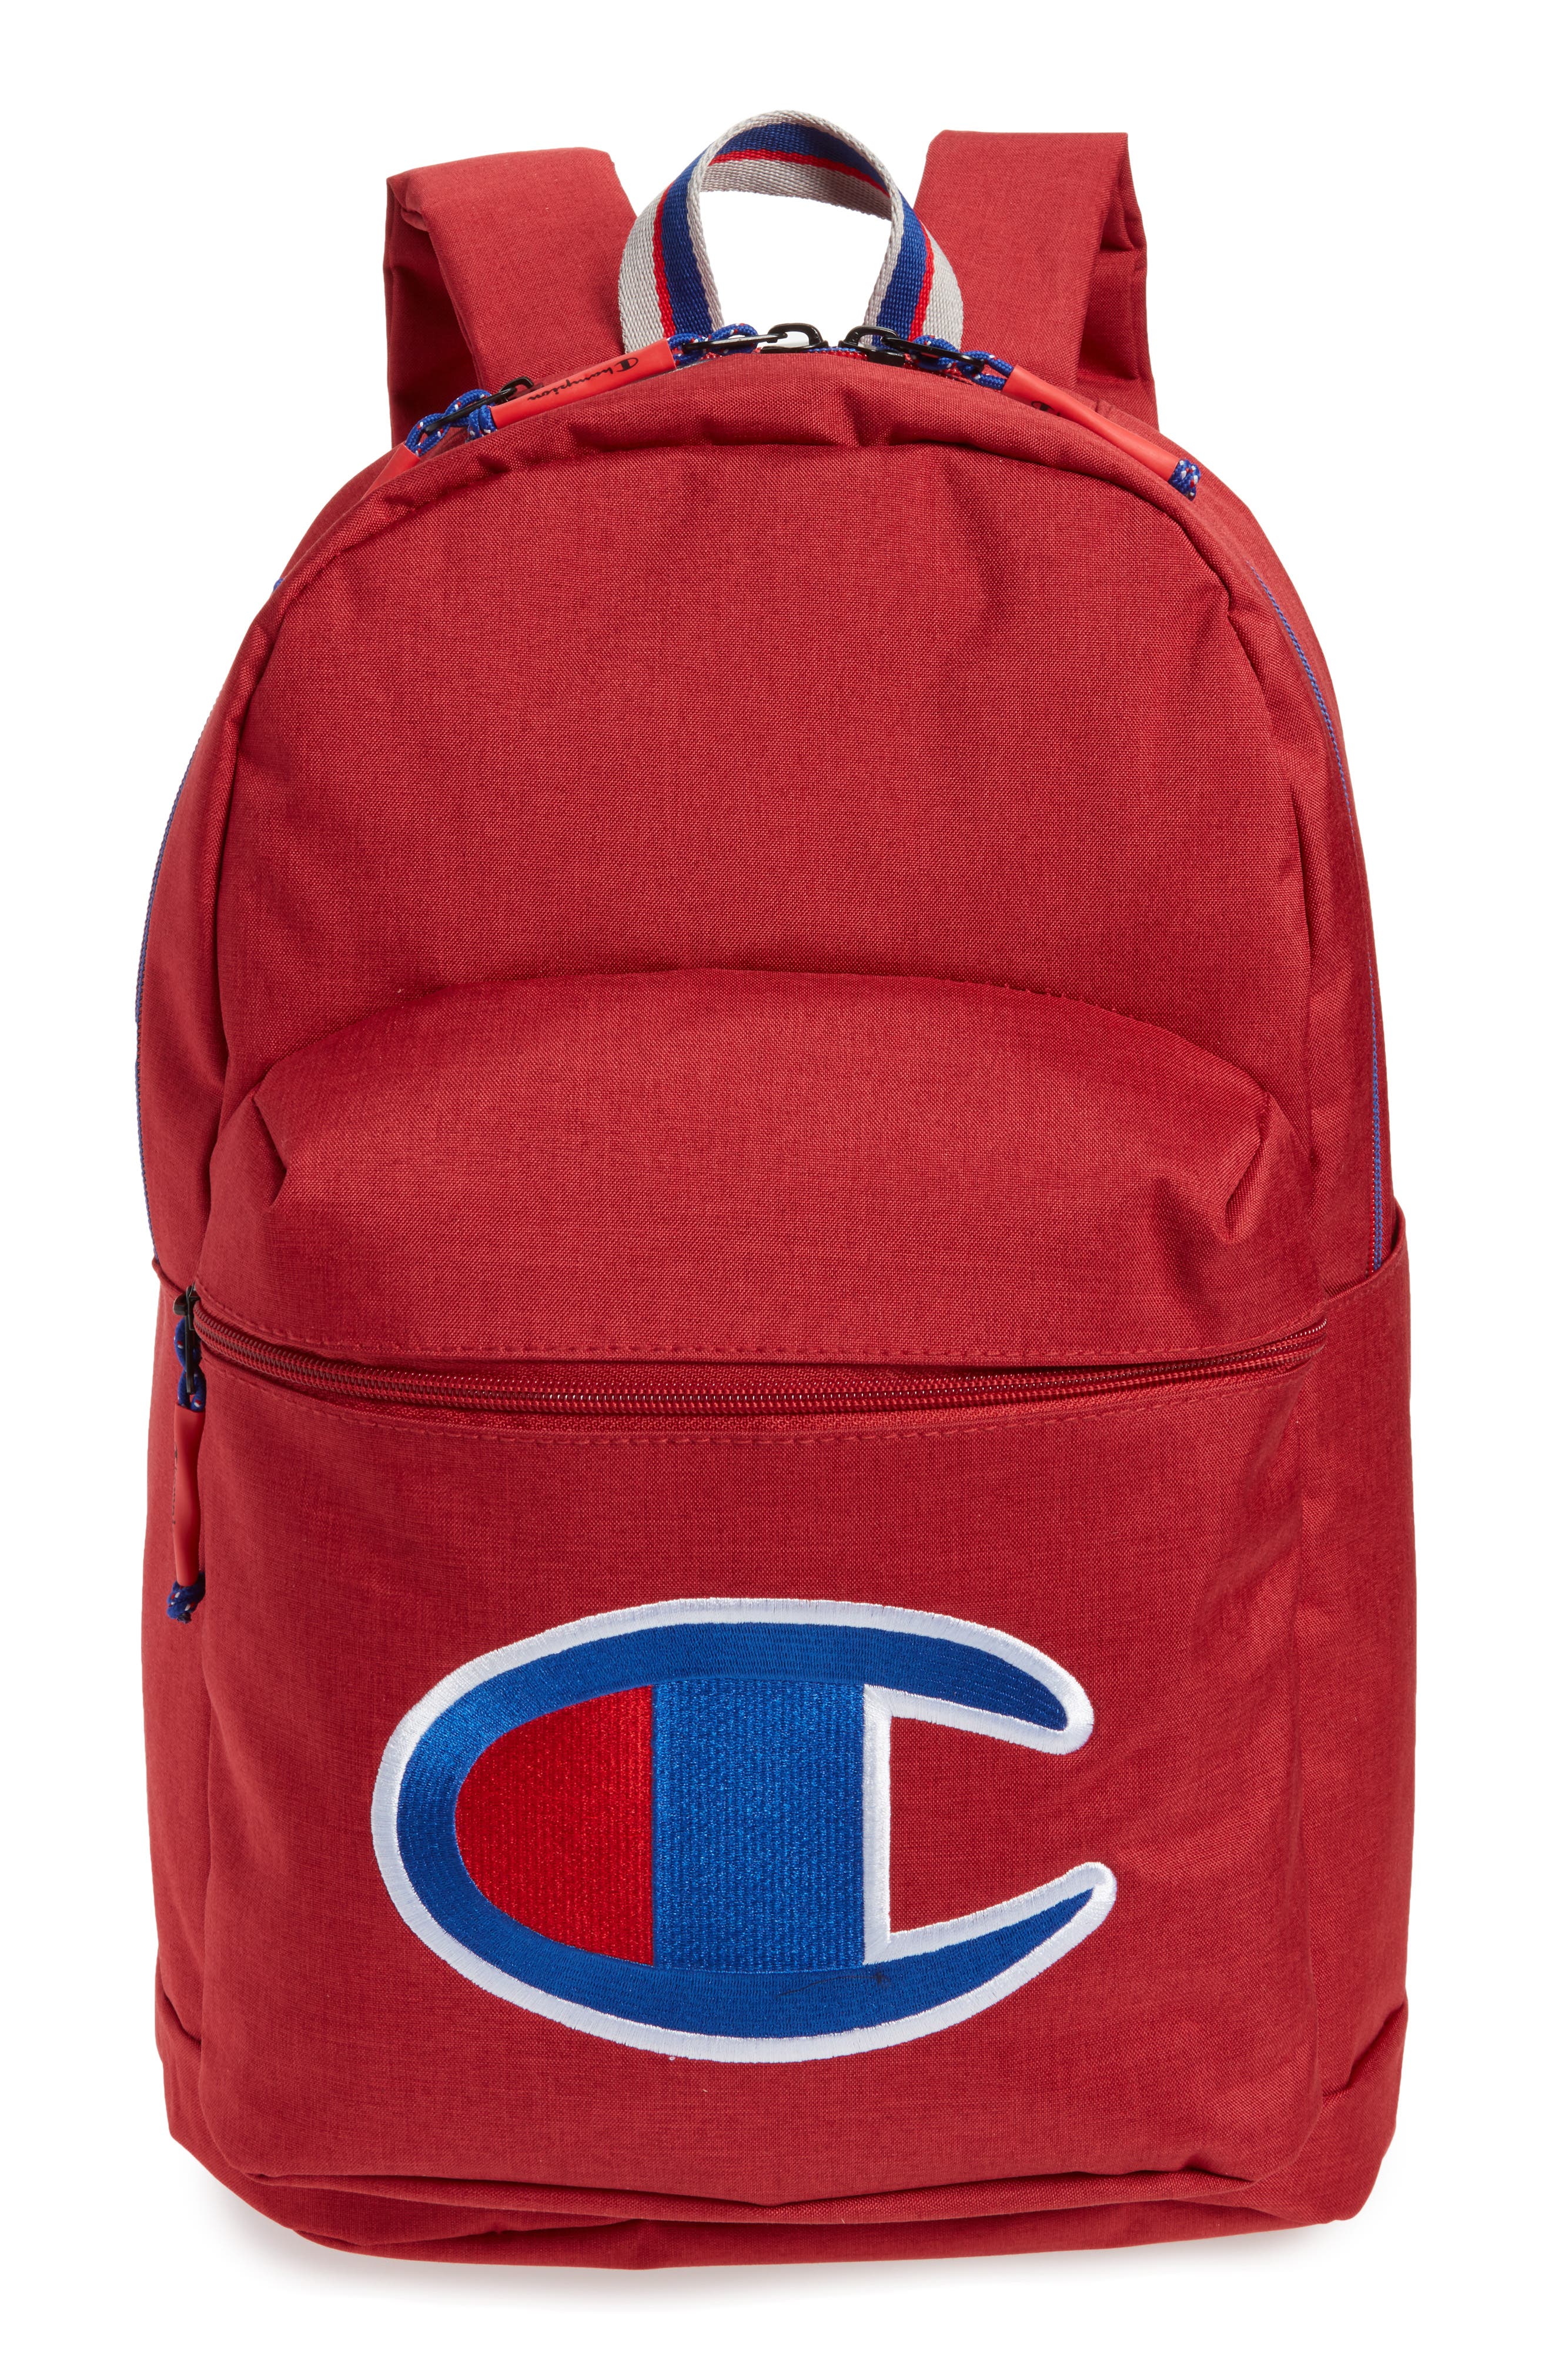 Champion Supercize Backpack - Red In Scarlet Heather | ModeSens